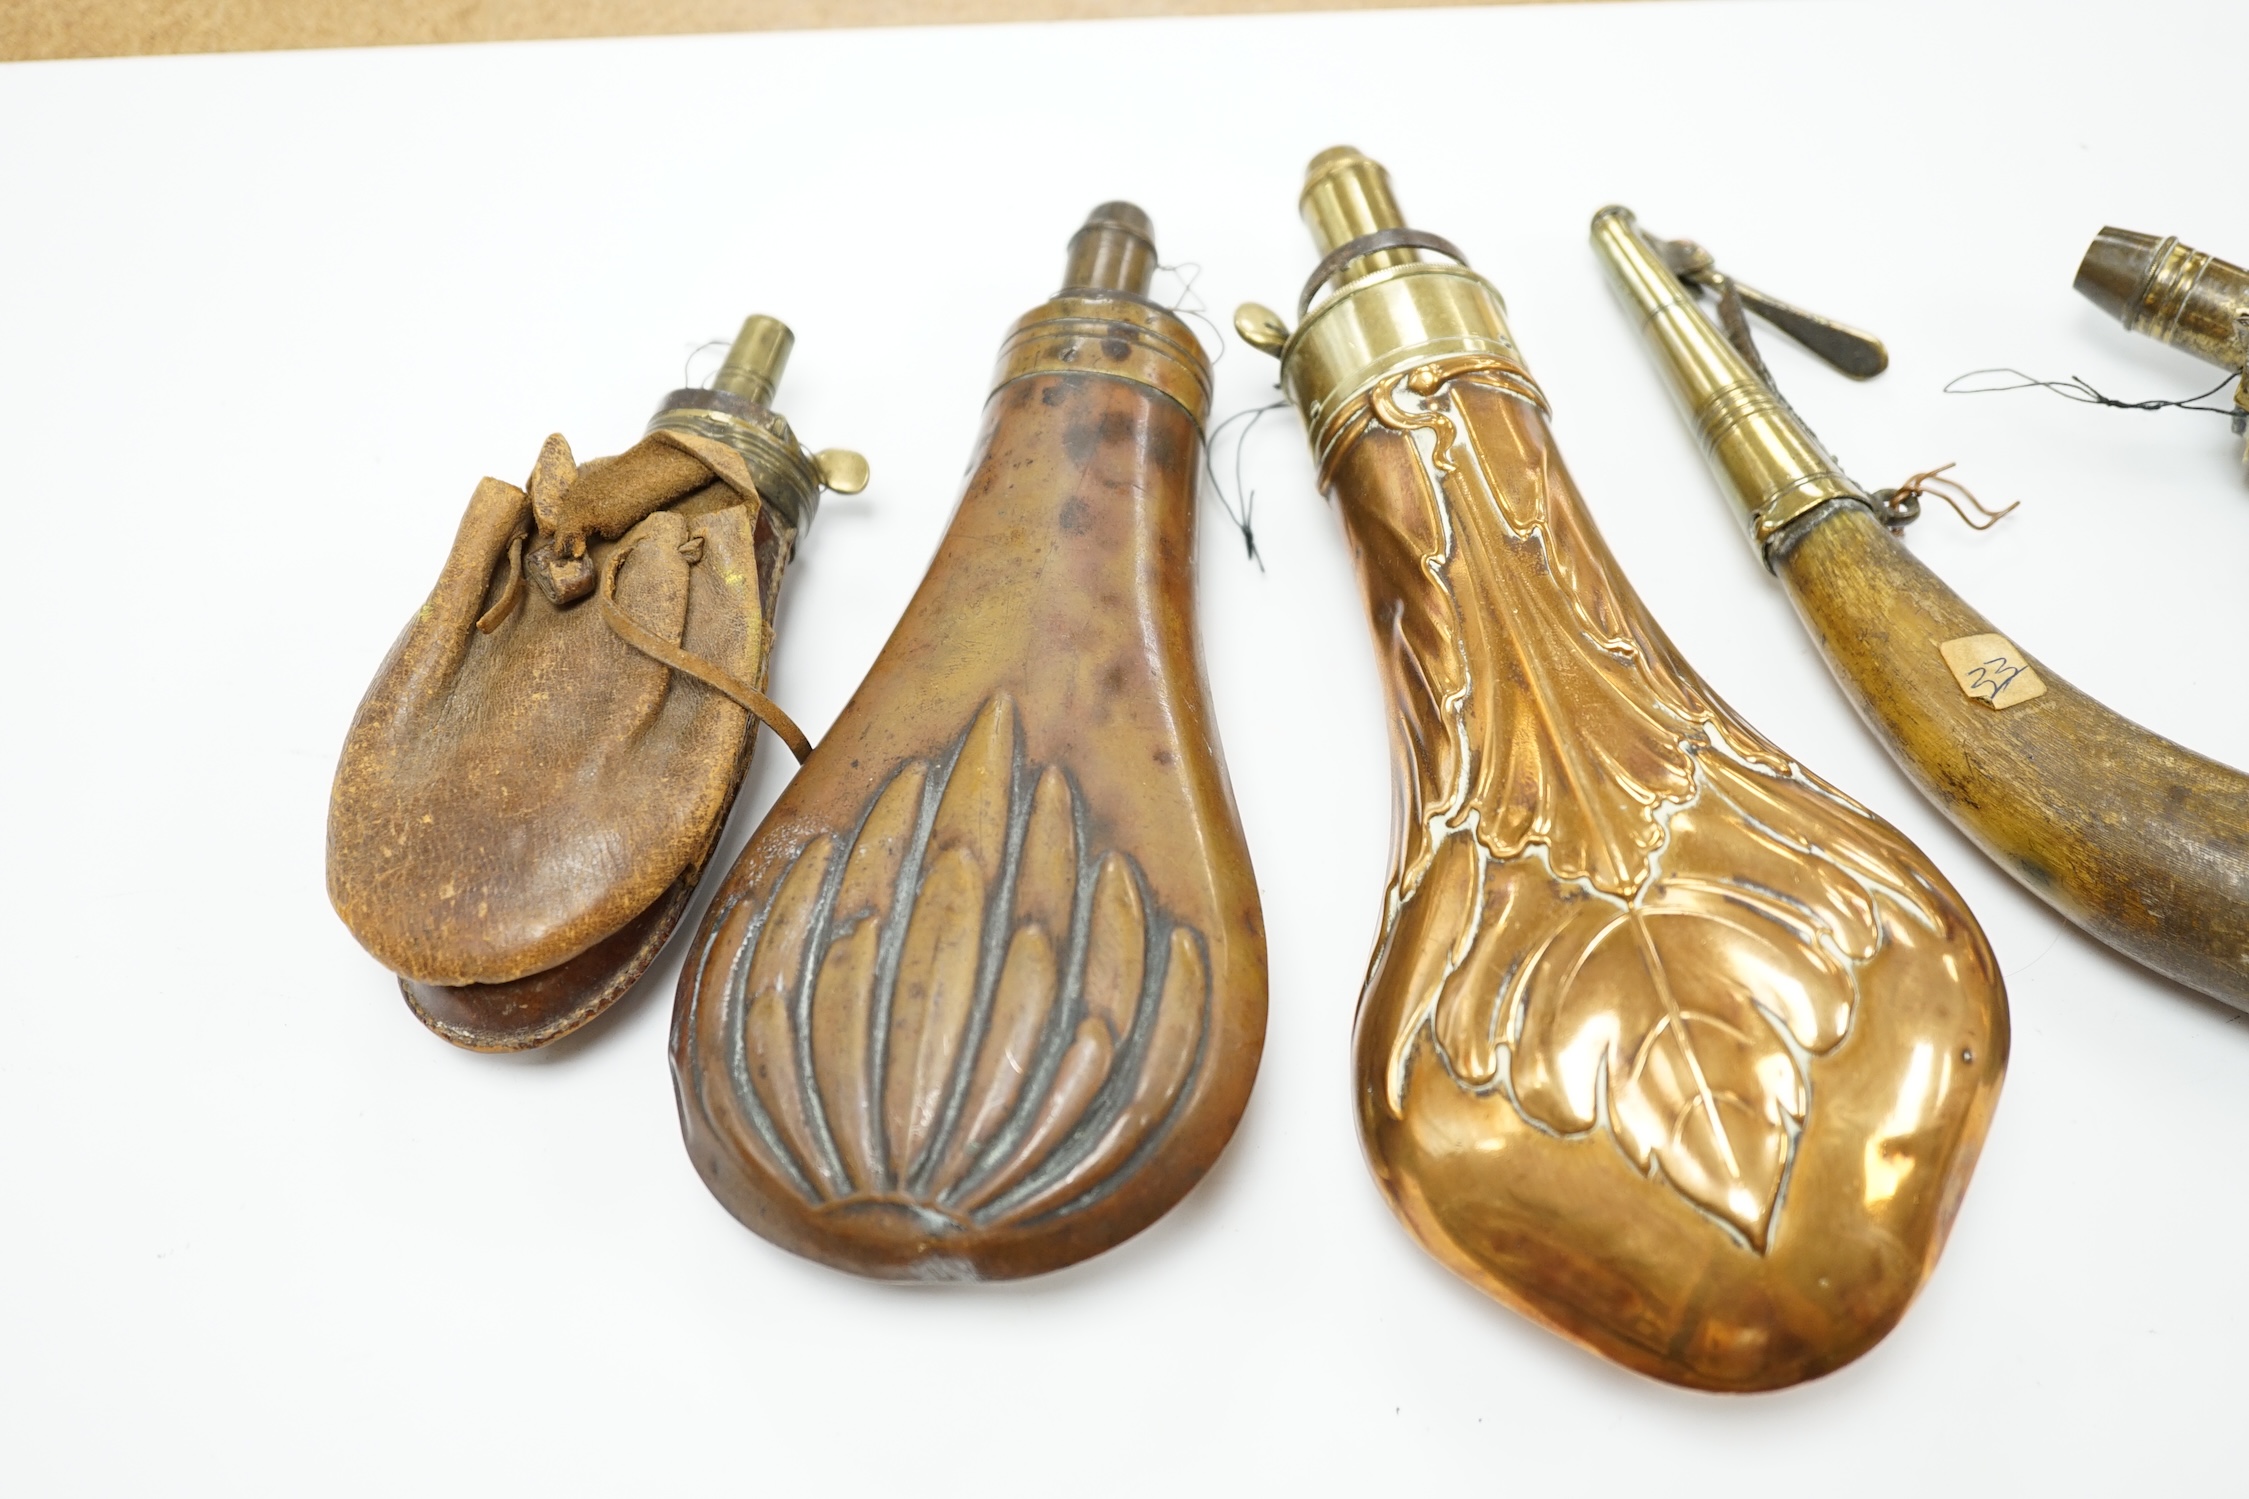 Five 19th century powder flasks; three copper and brass flasks, two with embossed decoration to the bodies, a leather covered flask and a horn Royal Artillery priming horn. Condition - poor to fair